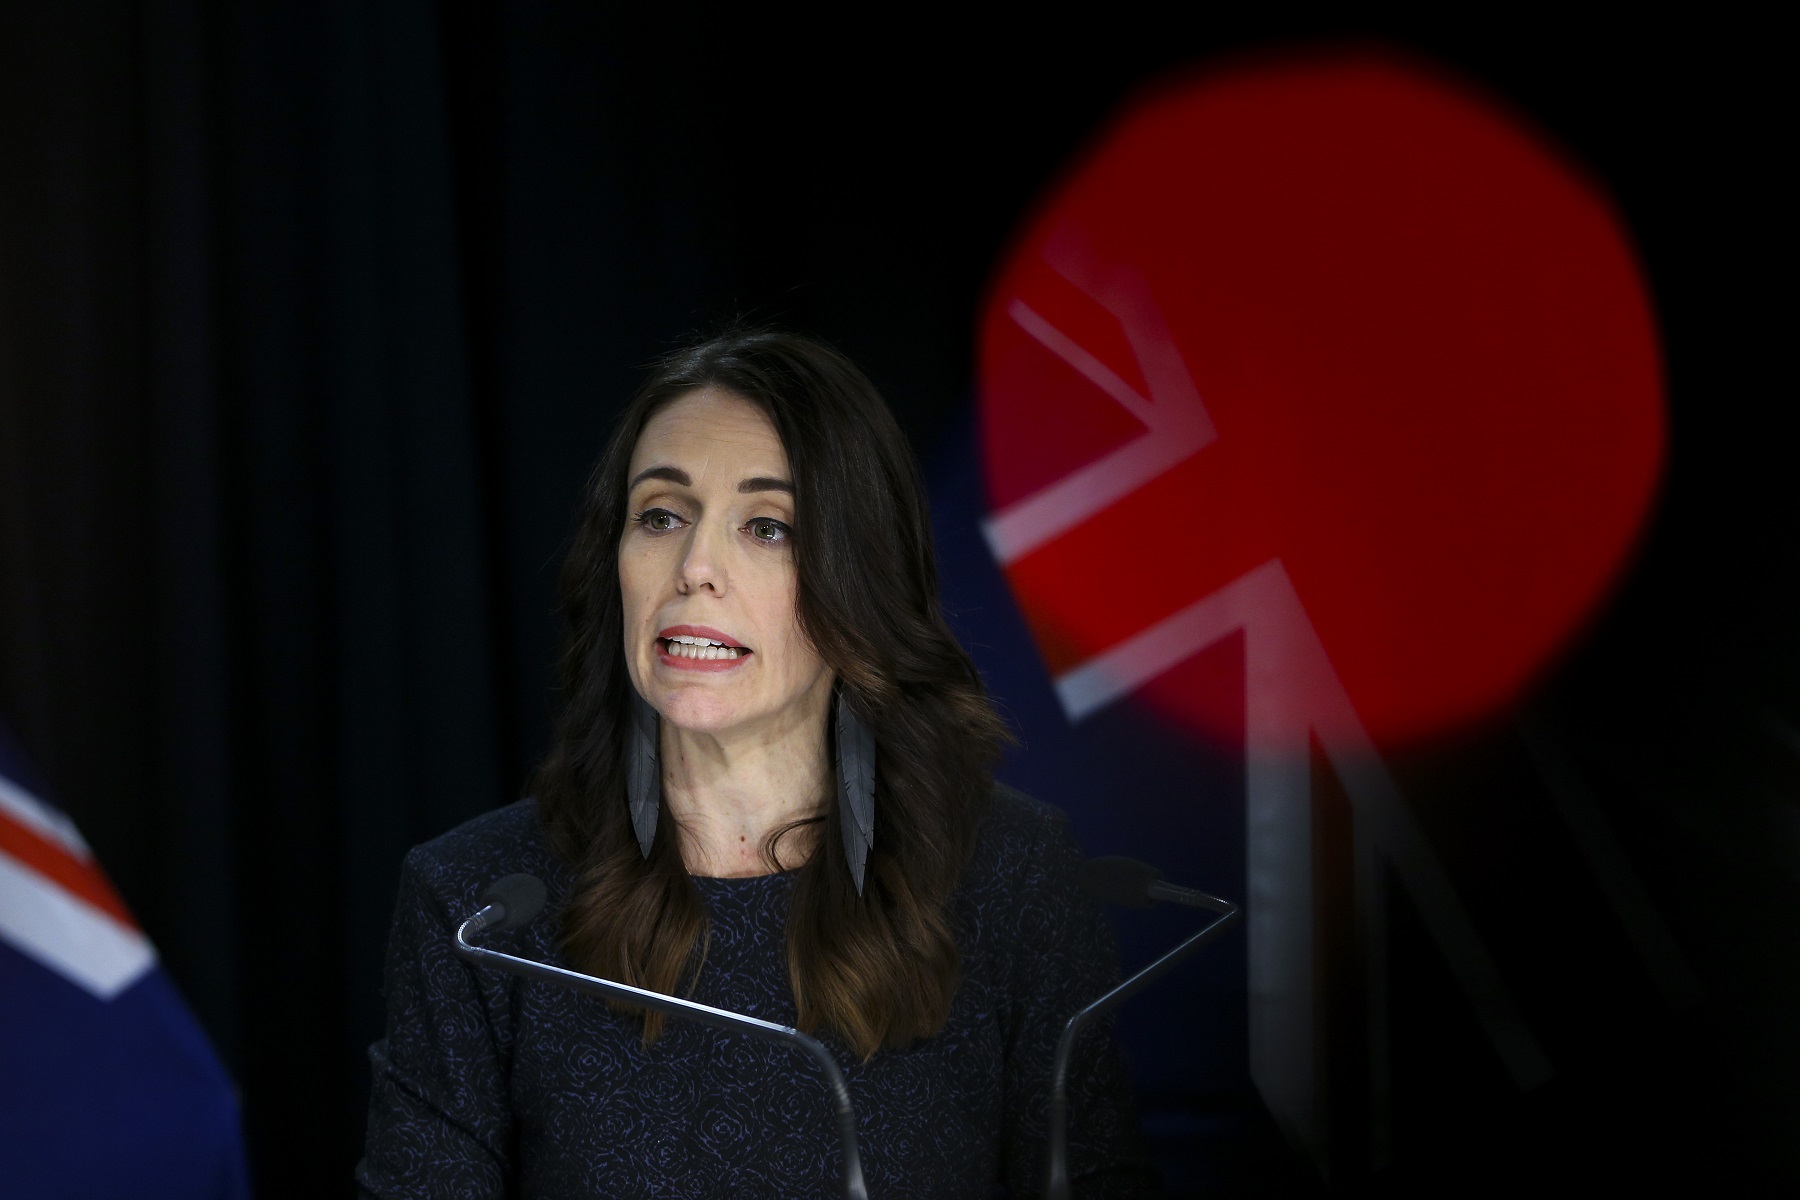 WELLINGTON, NEW ZEALAND - JULY 22: Prime Minister Jacinda Ardern speaks to media during a press conference at Parliament on July 22, 2020 in Wellington, New Zealand. Prime Minister Jacinda Ardern has announced the dismissal of Iain Lees-Galloway as a minister over an inappropriate relationship with a former staffer.  (Photo by Hagen Hopkins/Getty Images)